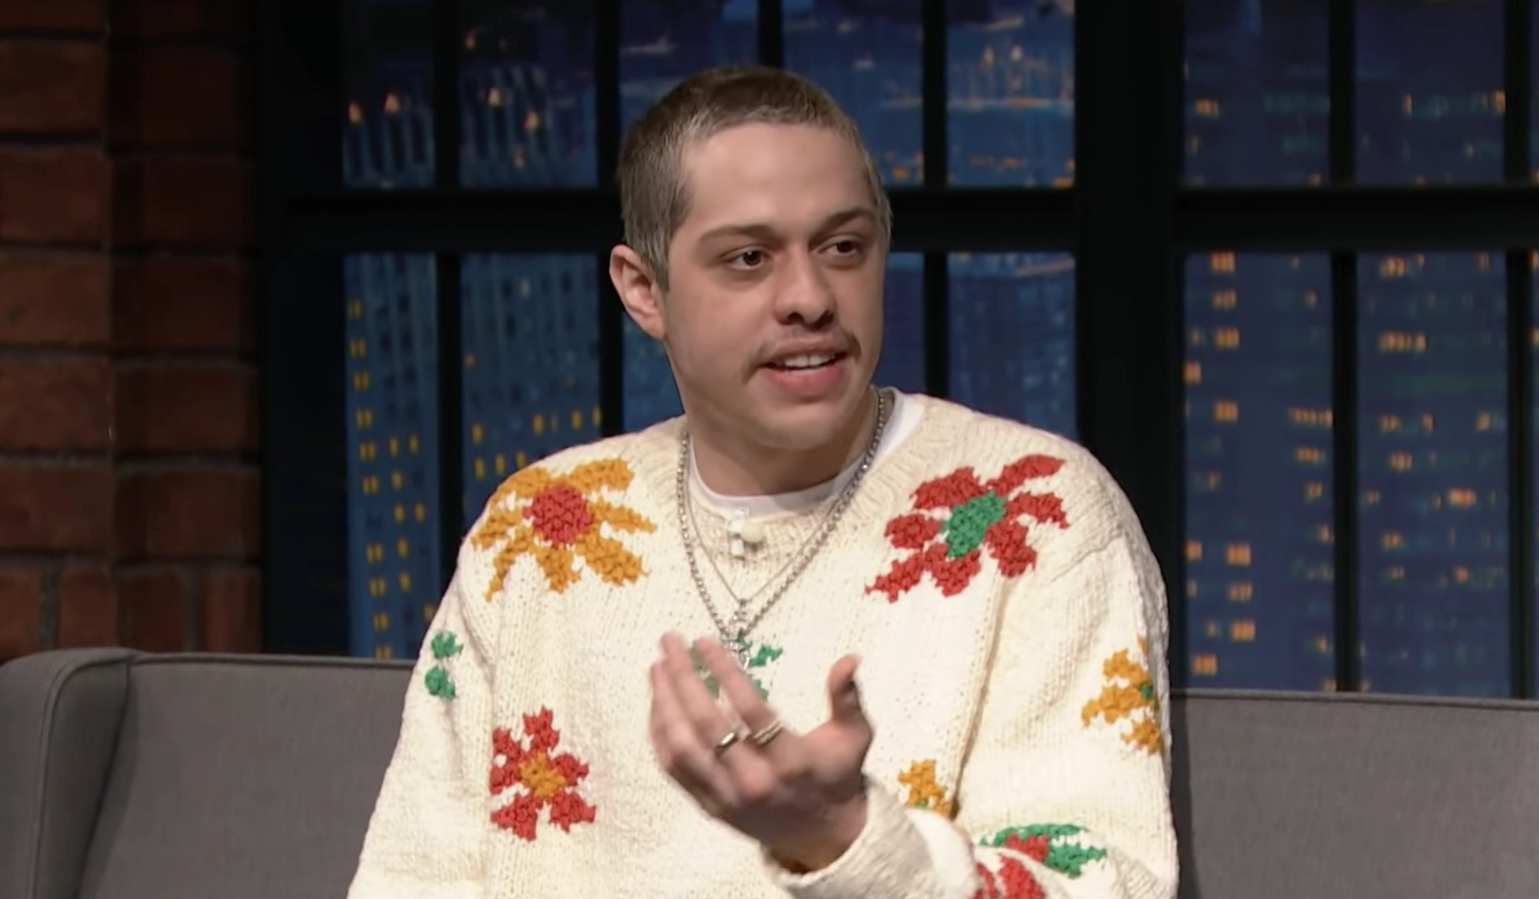 pete-davidson-convinced-by-mom-to-dump-kim-kardashian-snl-alum-reportedly-grew-disillusioned-was-under-the-kardashian-jenner-spell